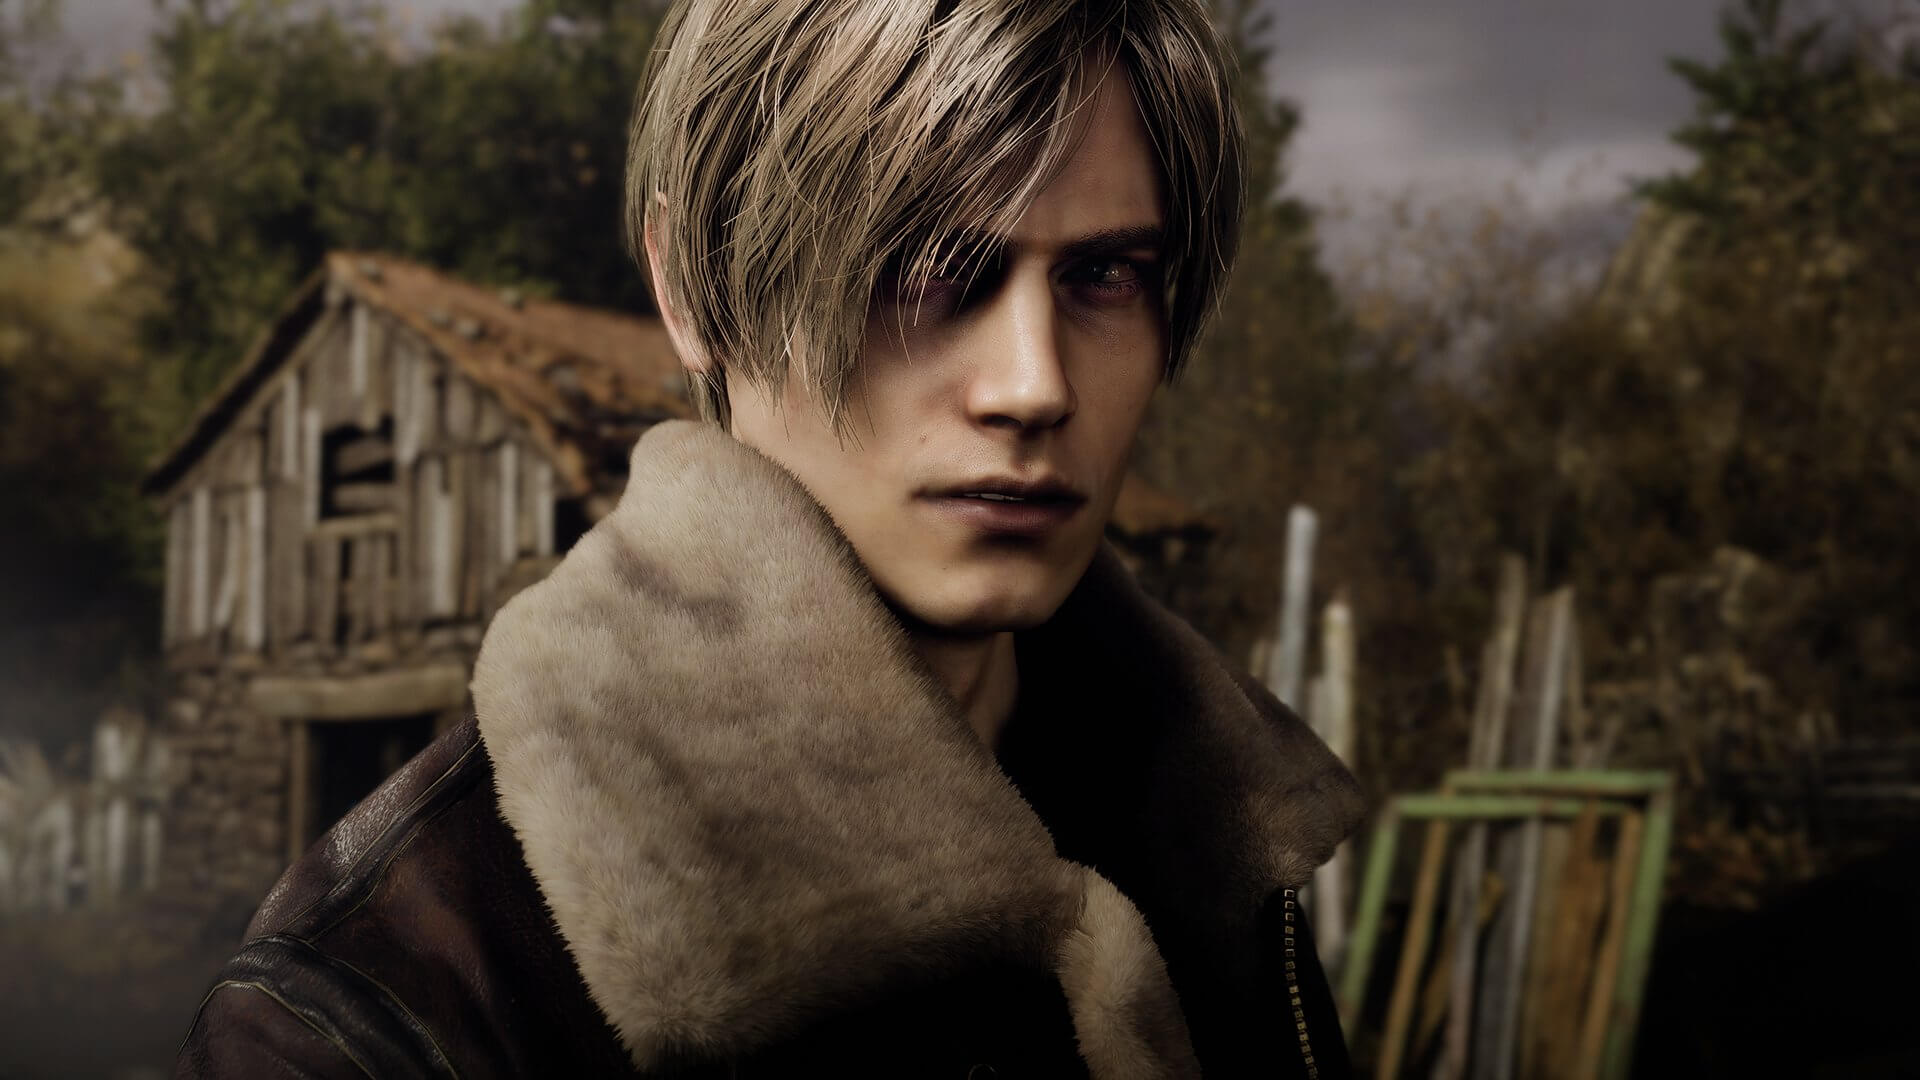 Resident Evil 4 remake mod brings back the classic fixed camera of